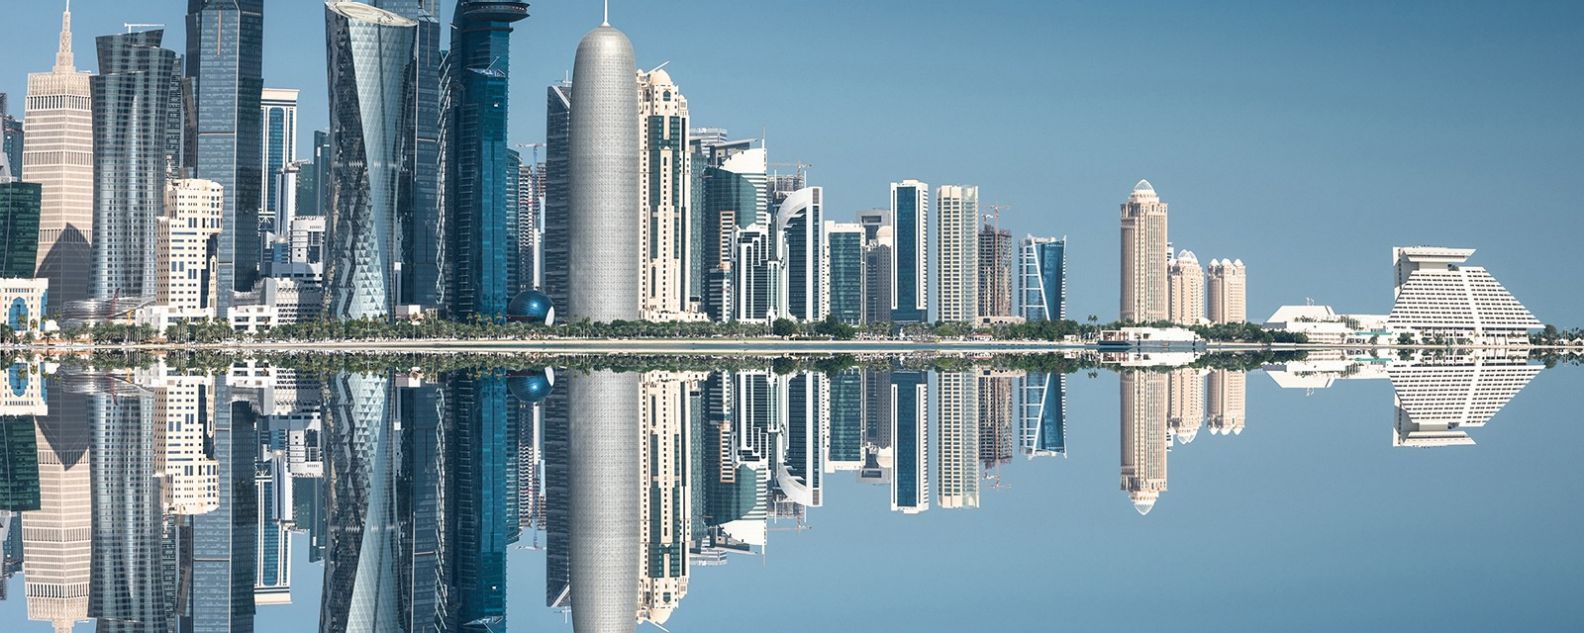 A city skyline image reflecting in the sea